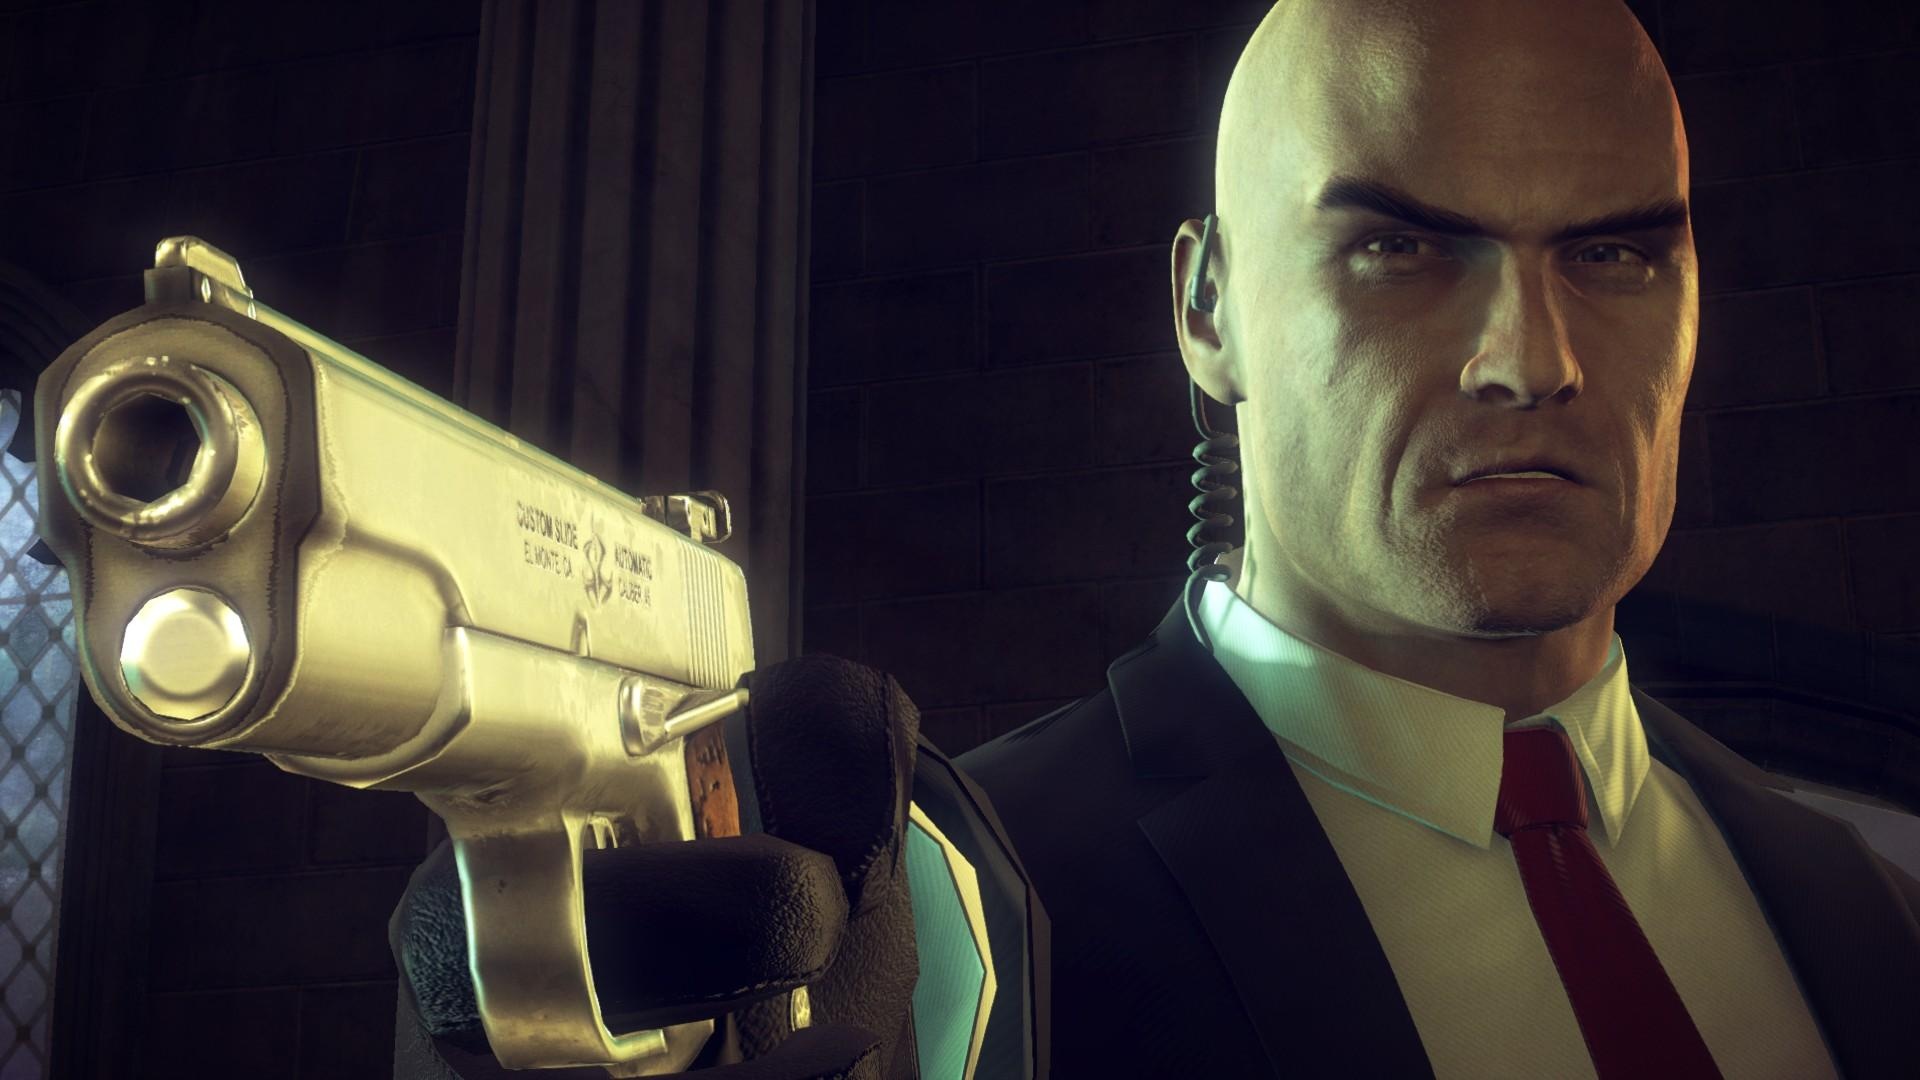 Hitman: Absolution, Agent 47 wallpapers, Intense and captivating, Full HD quality, 1920x1080 Full HD Desktop